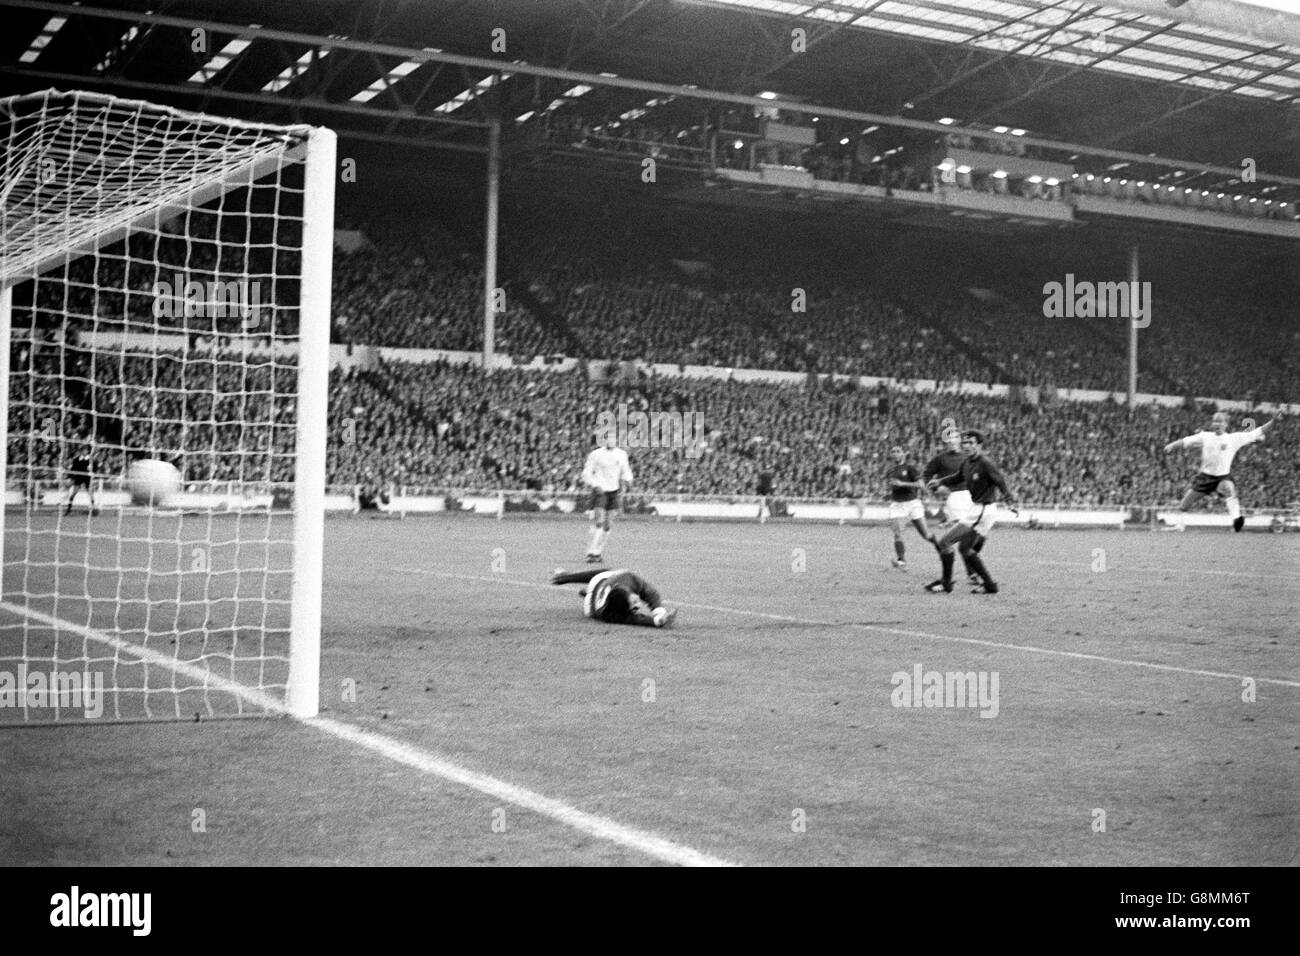 Soccer - World Cup England 1966 - Semi Final - Portugal v England - Wembley Stadium. England's Bobby Charlton (r) fires his team's second goal past Portugal goalkeeper Jose Pereira (l) Stock Photo